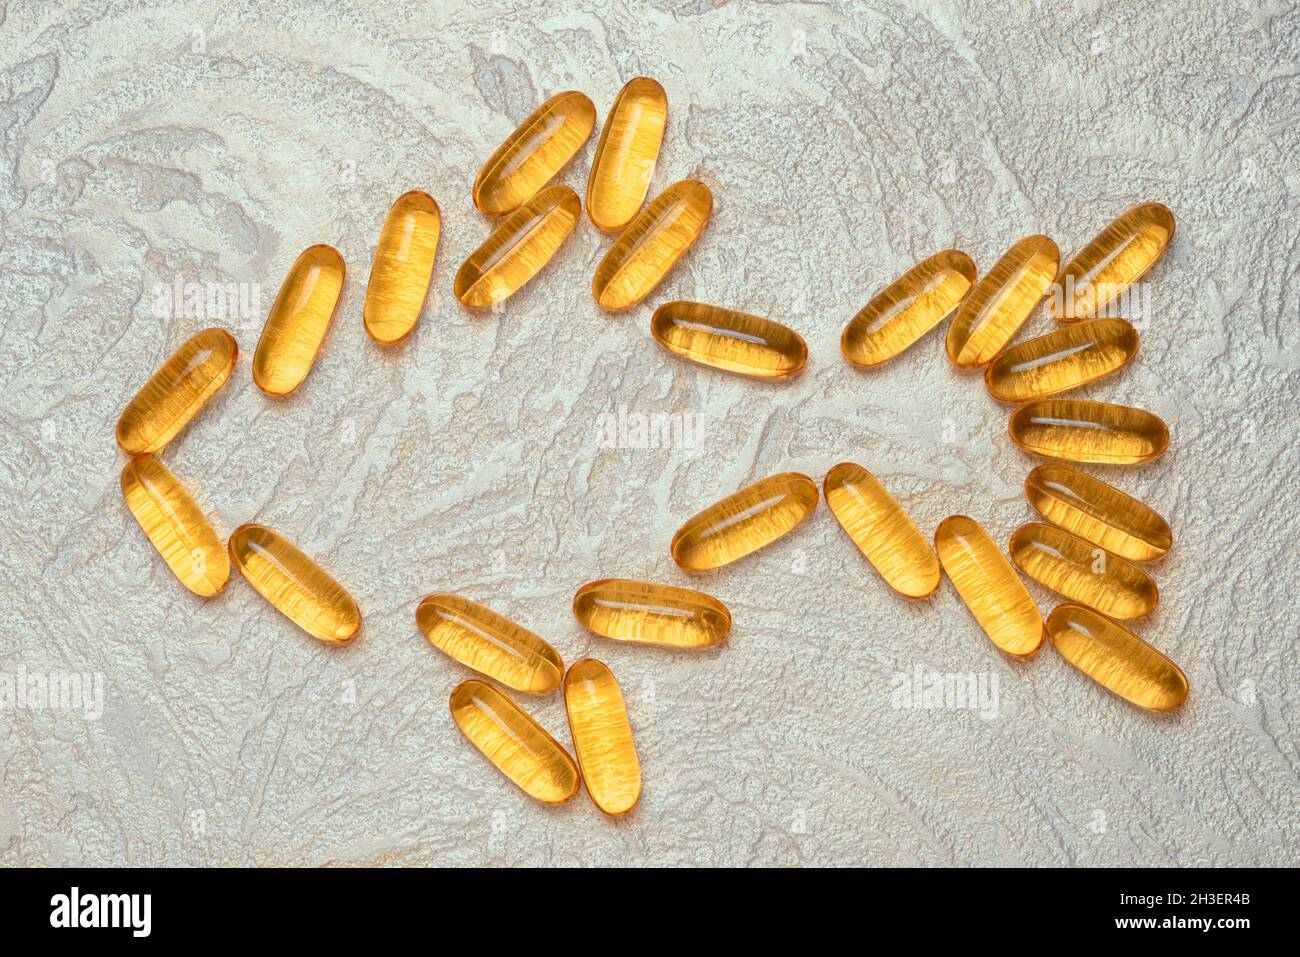 Omega3 capsules in fish shape silhouette on a cement background. EPA and DHA are essential fatty substances that our bodies need on a daily basis. Stock Photo